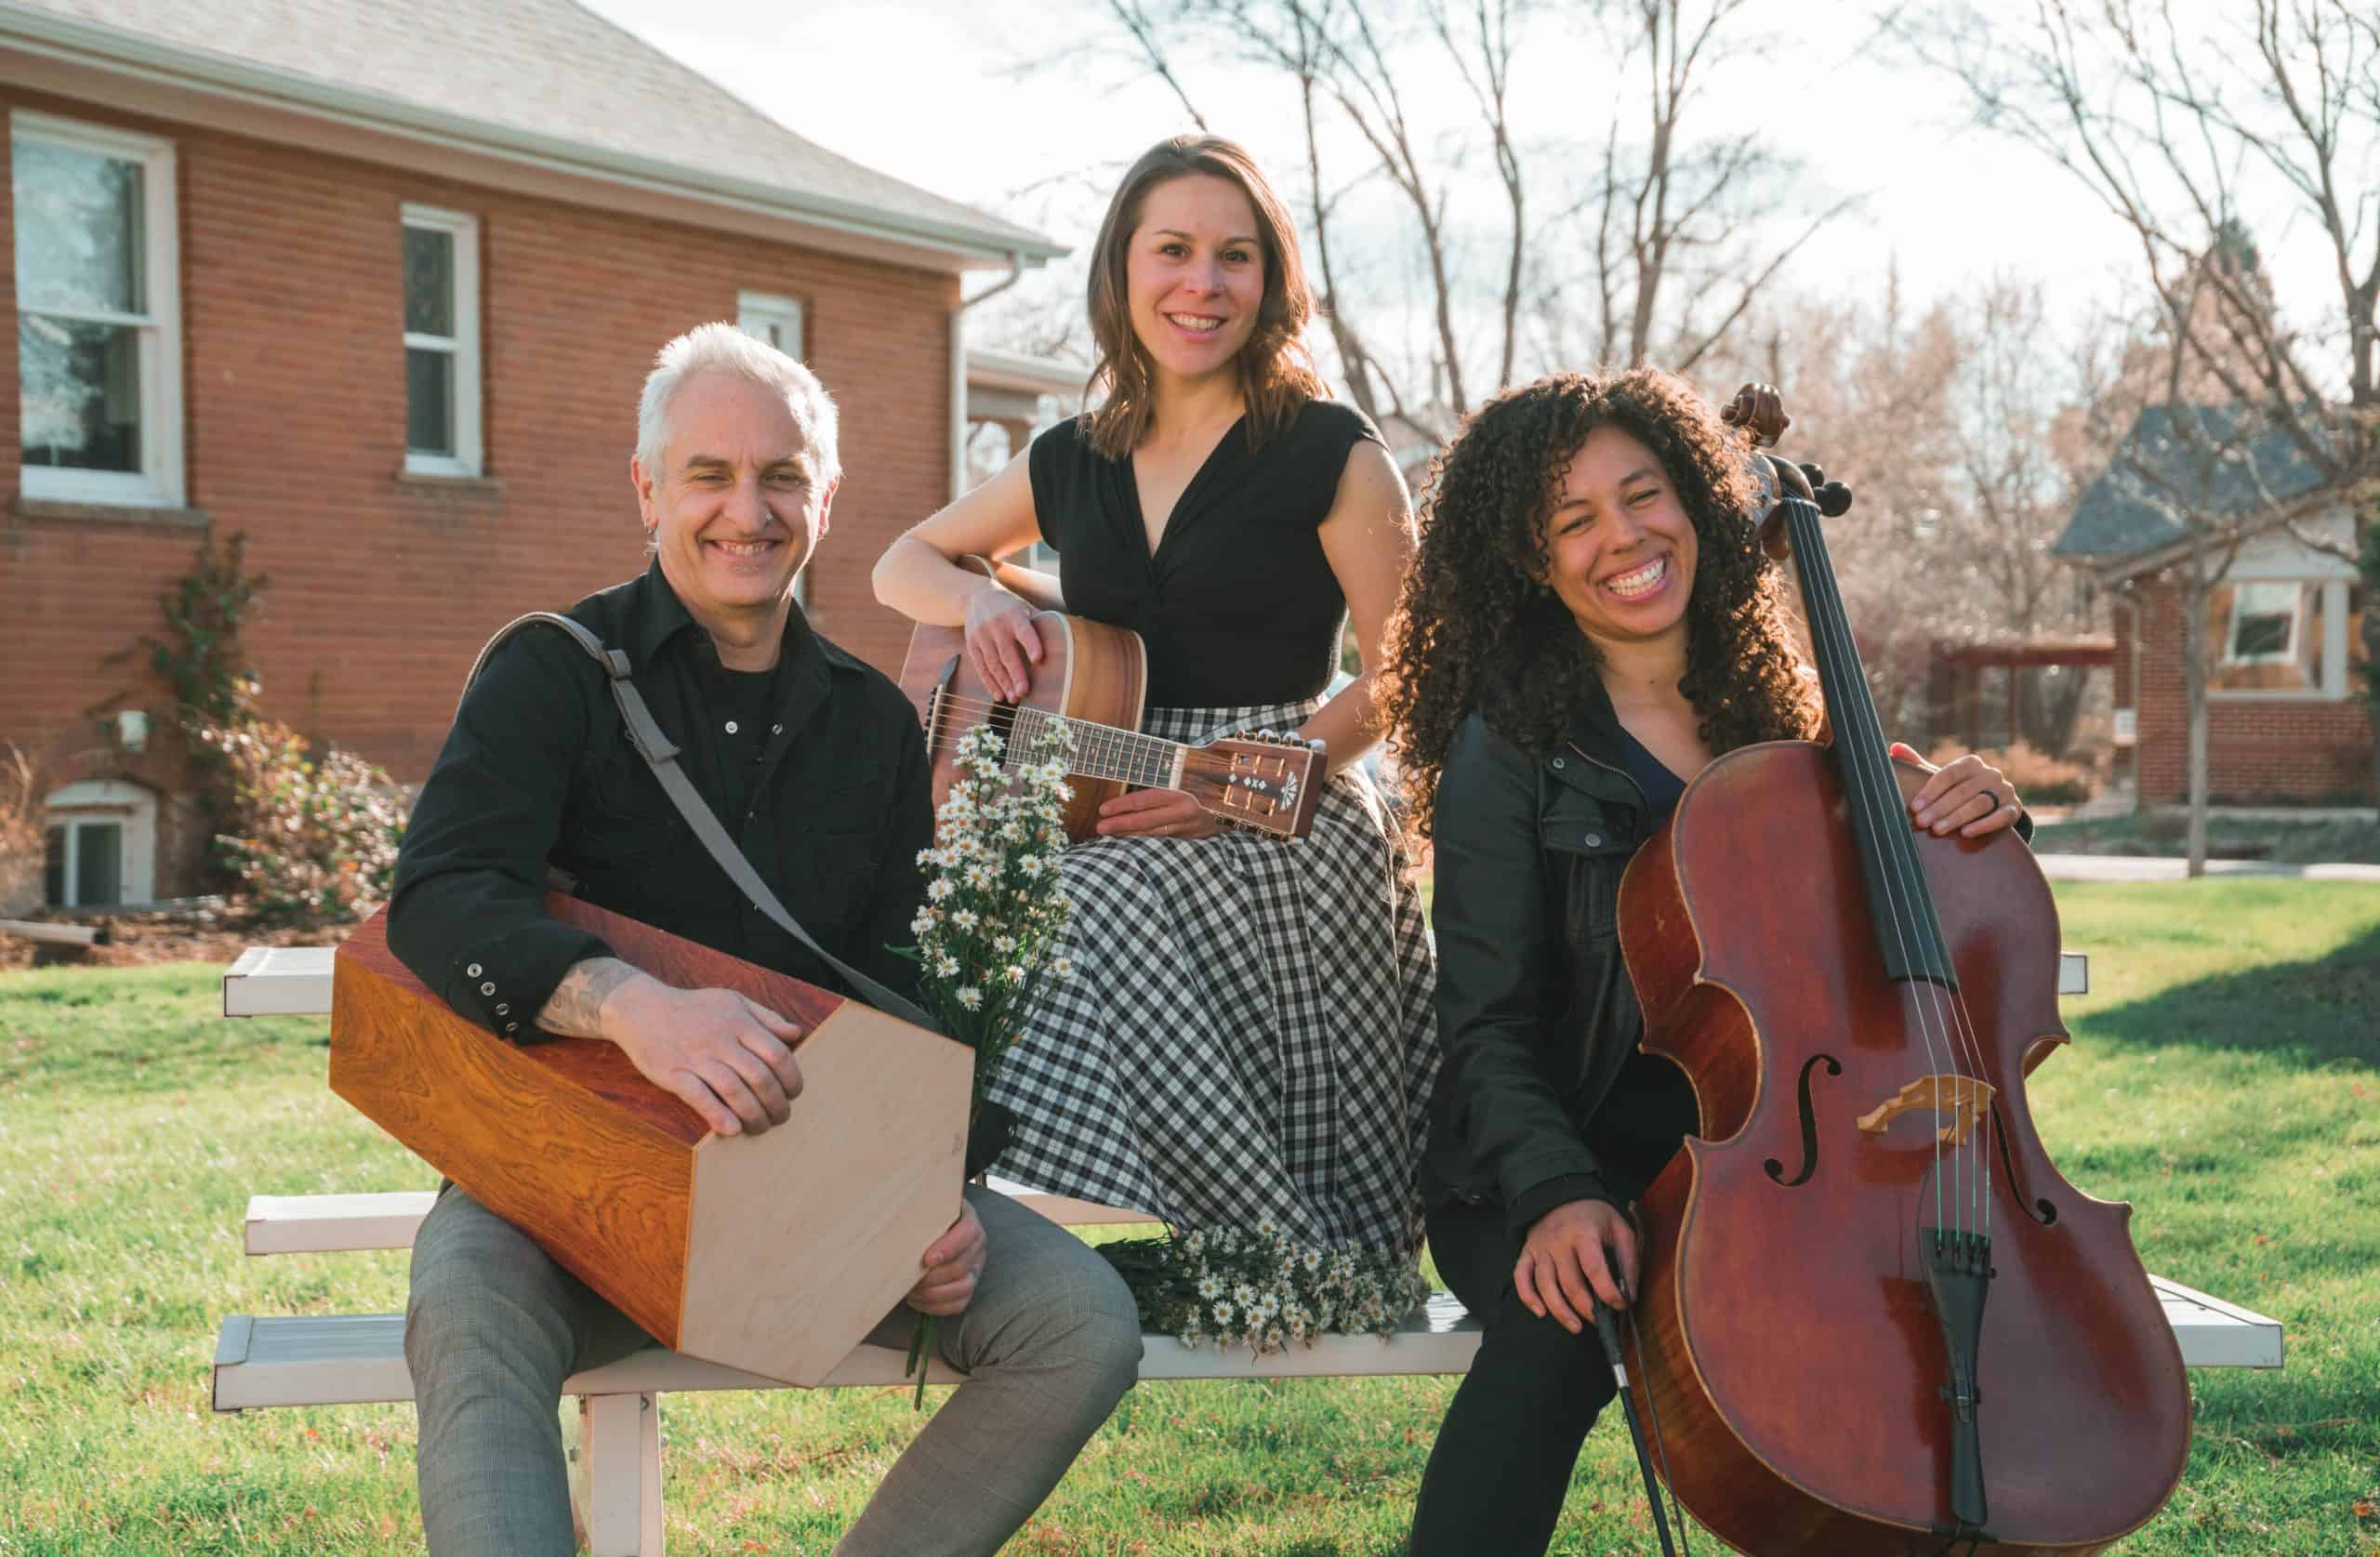 Luther Strings Presents: The Deborah Solo Trio - Concert Ticket Reservation - Saturday, September 28th at 4:30pm